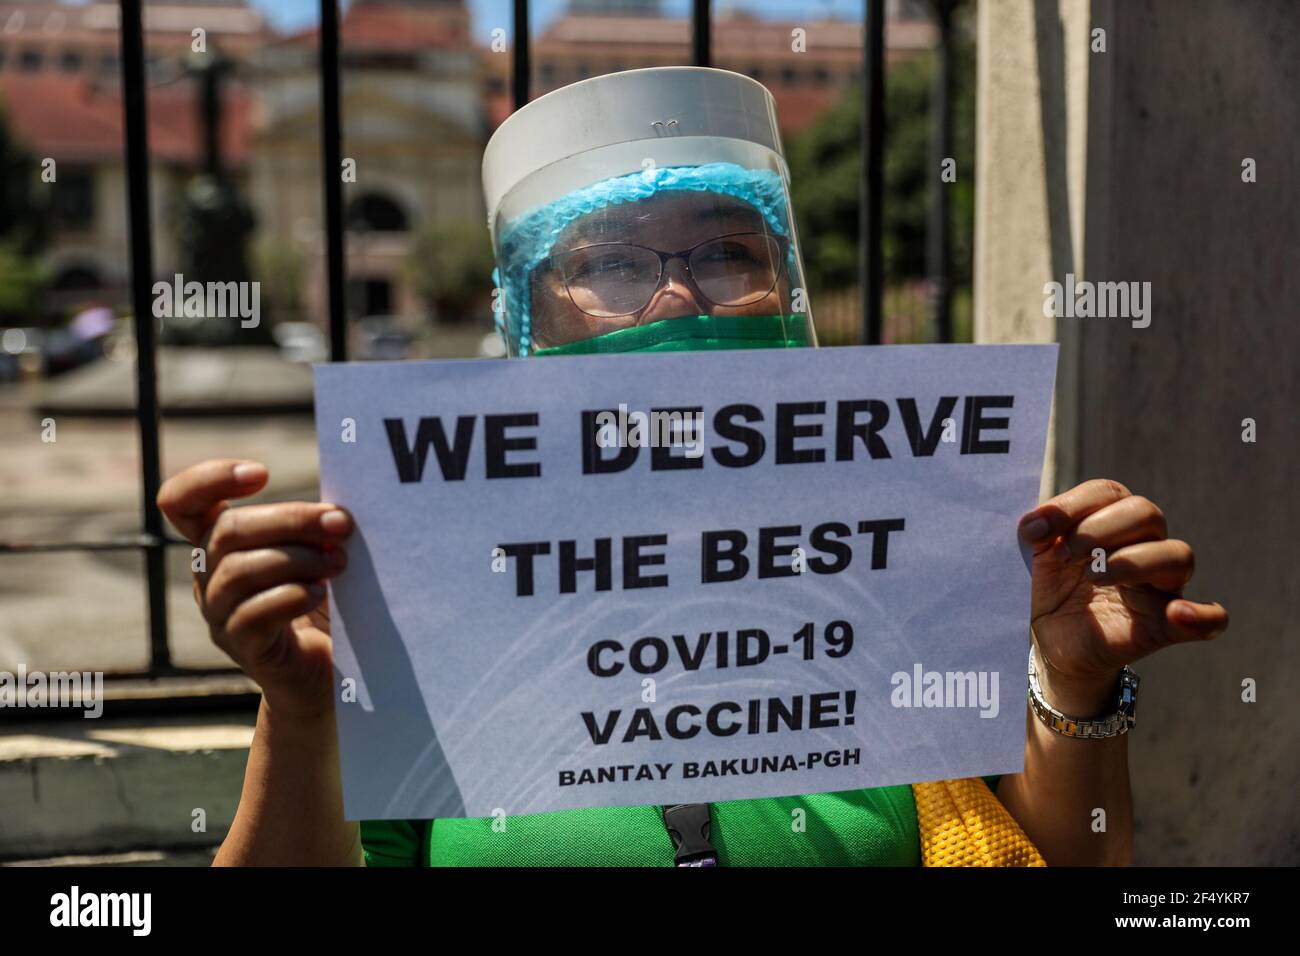 Healthcare workers call for a free, safer and effective COVID-19 vaccine during a protest outside the Philippine General Hospital in Manila. Activists along with medical workers and students demanded for a free and safer COVID-19 vaccine for health care workers, who continue to be at risk amid the surge of coronavirus cases in the country. The government, meanwhile, faced criticism for failing to immediately launch a vaccination program, leaving the Philippines the only ASEAN member with no COVID-19 vaccines that is expected to arrive in late February. Philippines. Stock Photo